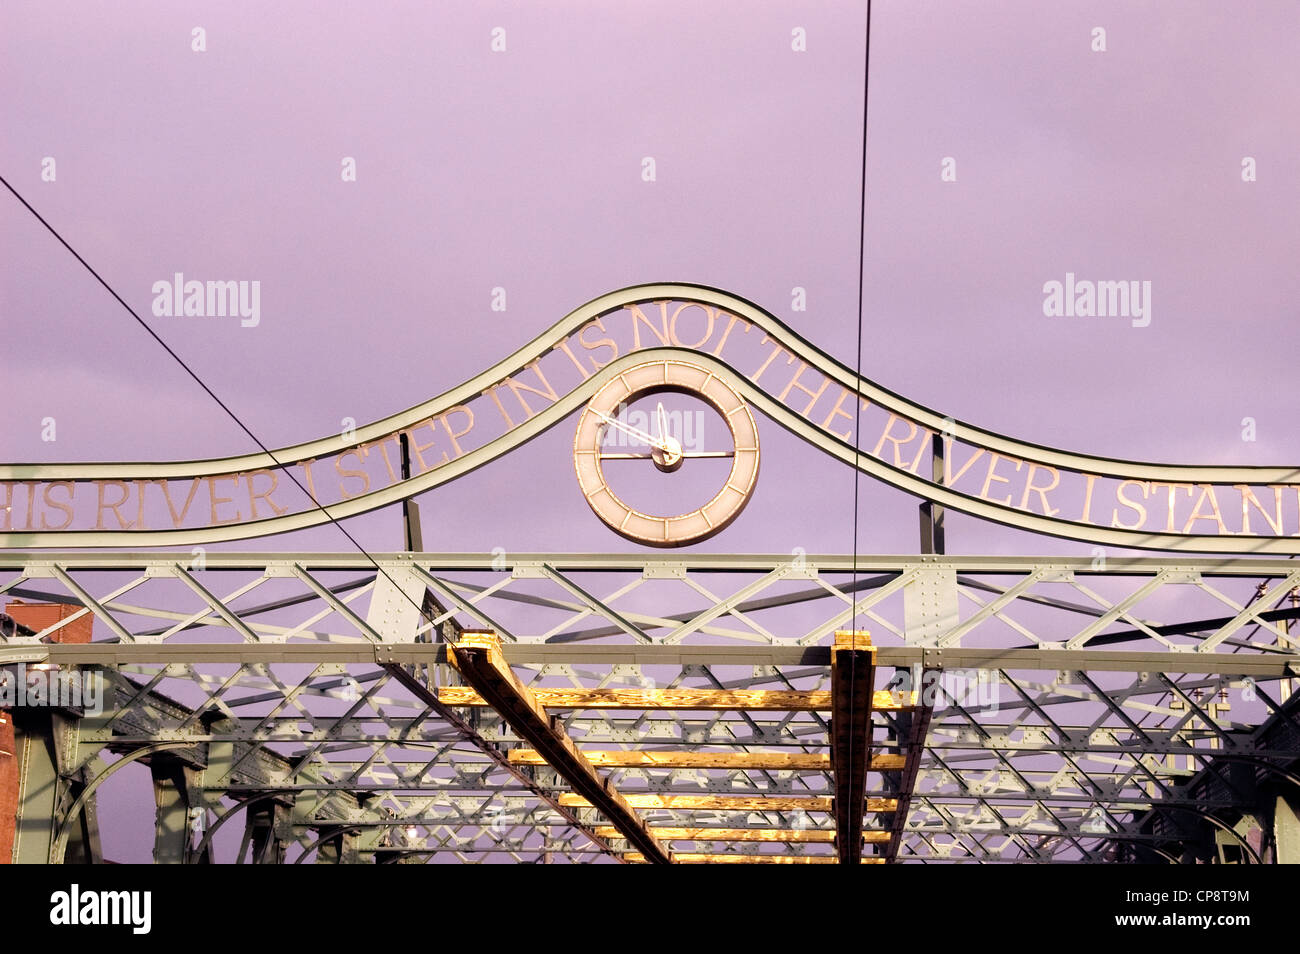 An art installation atop the Queen Street Viaduct steel truss bridge on Queen Street East in the downtown Riverside are in Toronto, Ontario, Canada. Stock Photo